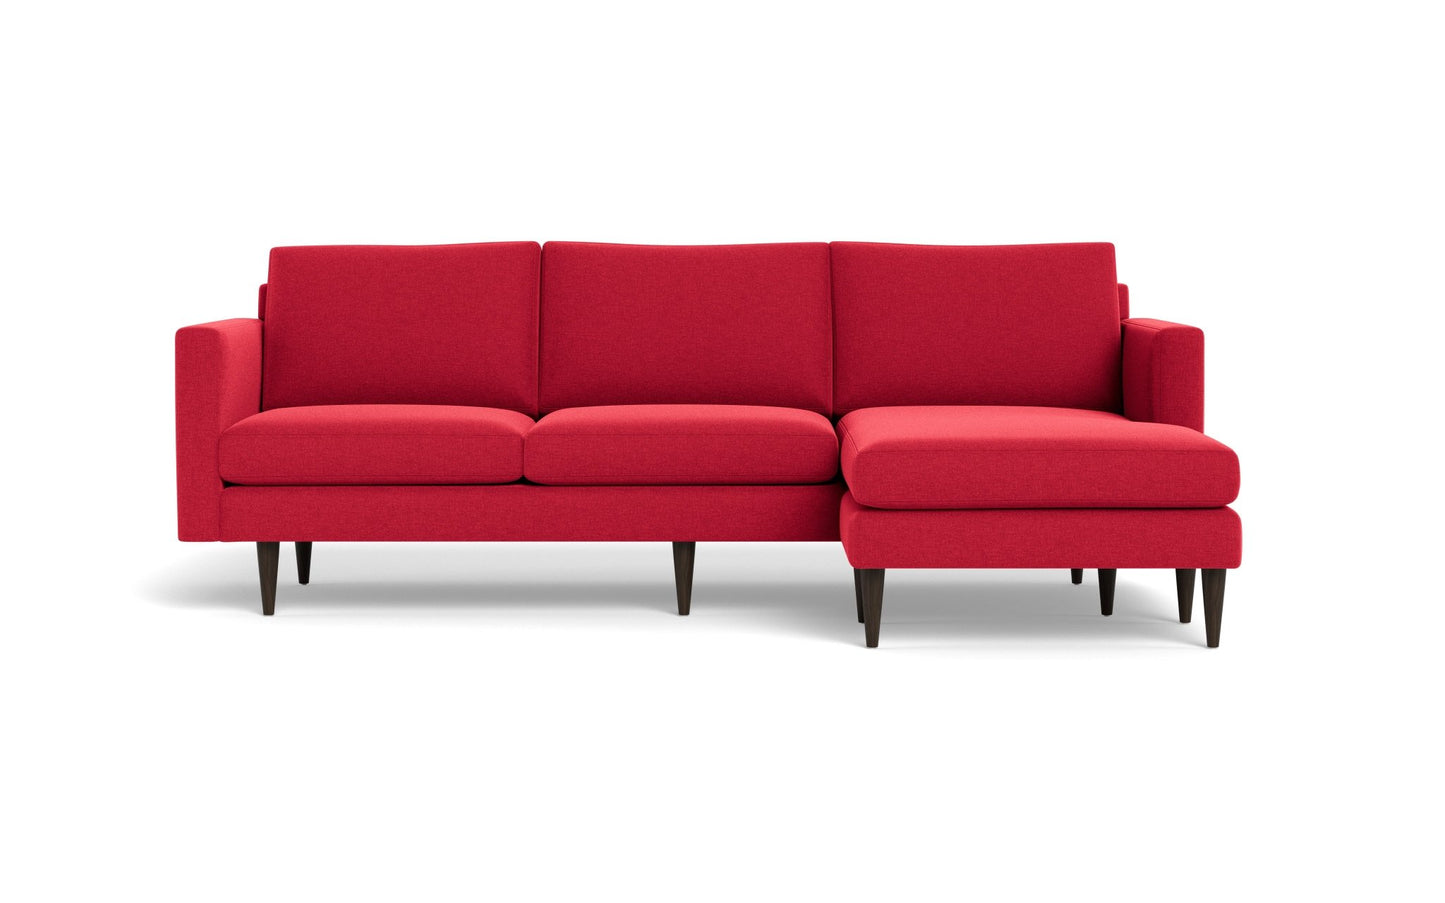 Wallace Untufted Reversible Chaise Sofa - Bennett Red